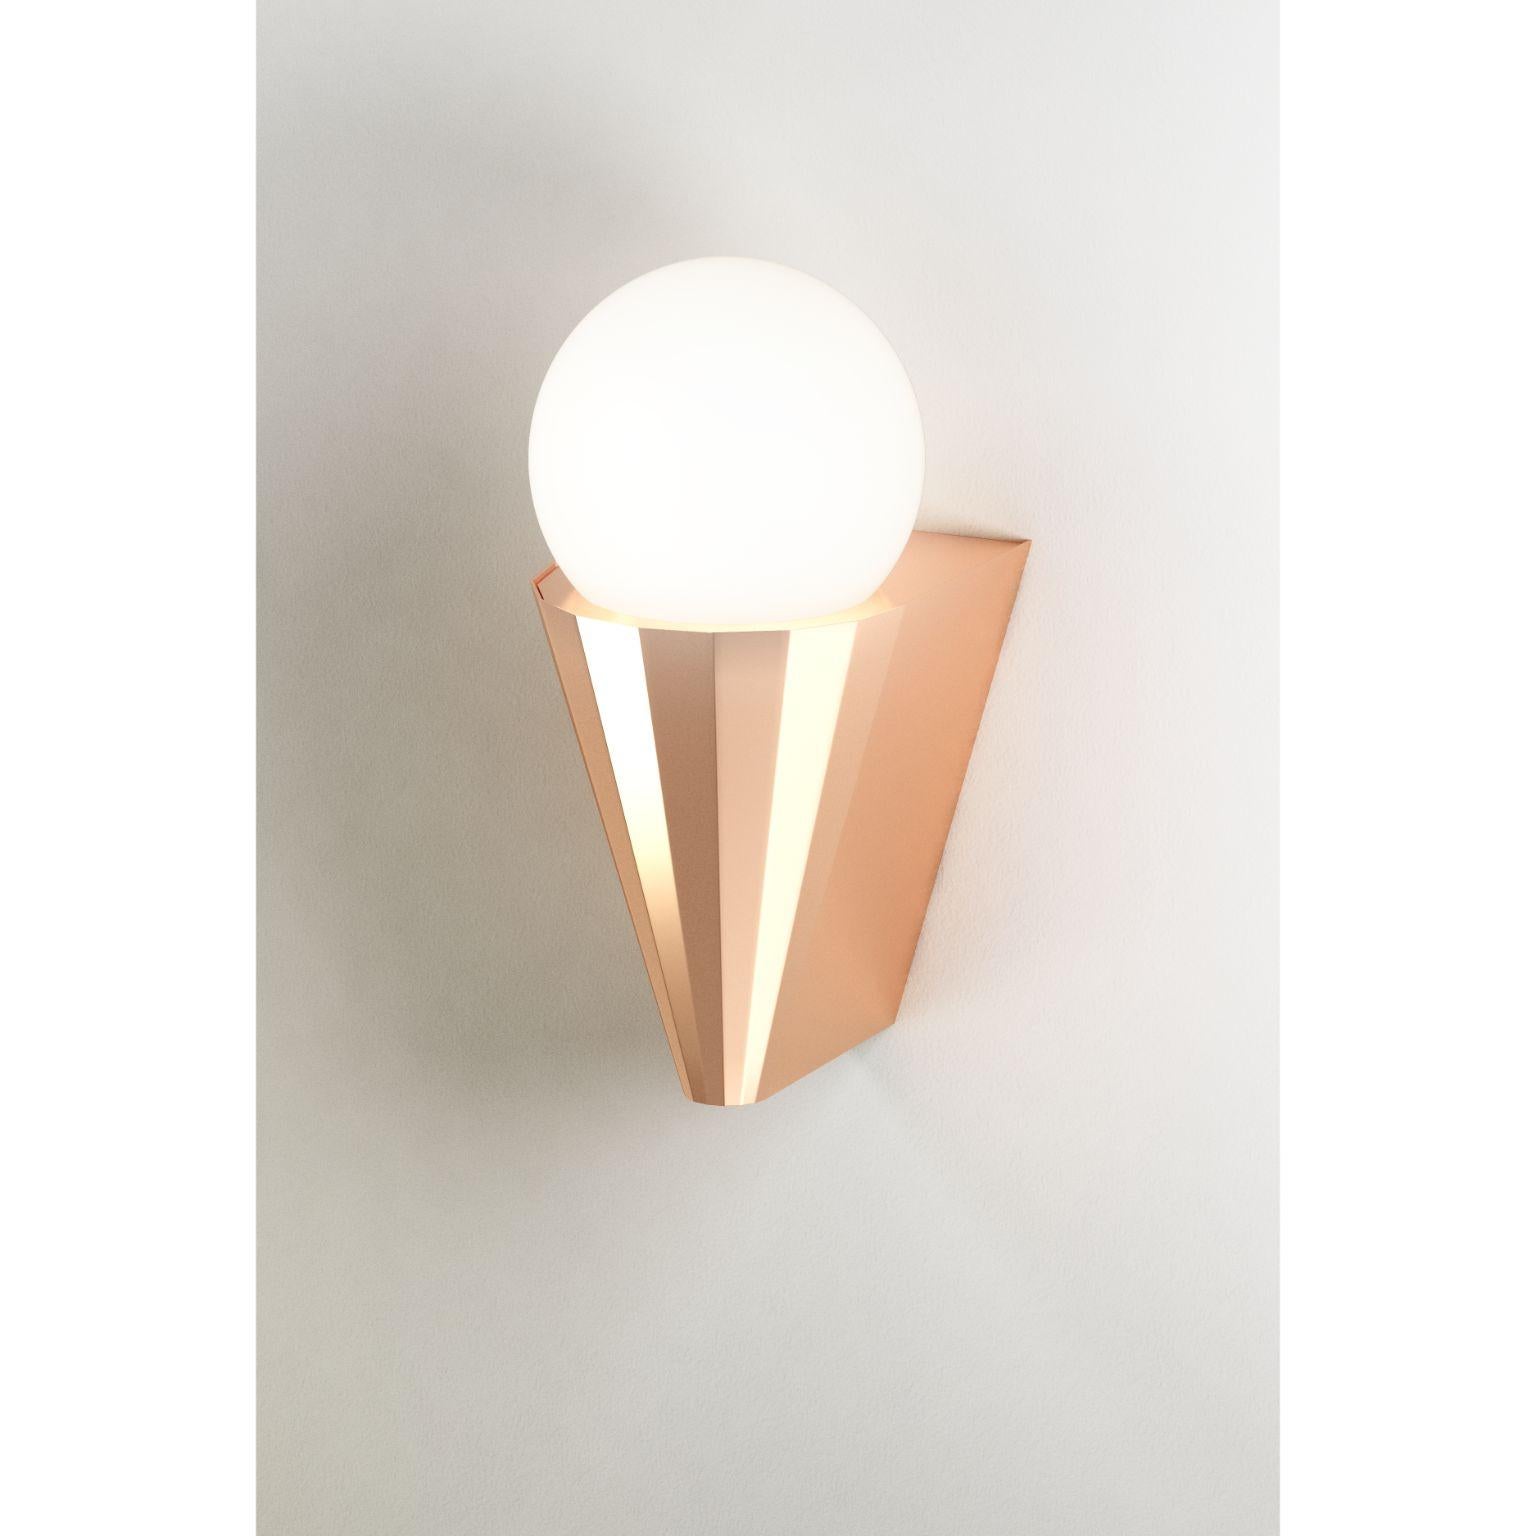 IP Cornet polished copper wall light by Emilie Cathelineau
Dimensions: D 10 x W 12.5 X H 21.2 cm
Materials: solid brass, polished copper
Others finishes are available.

All our lamps can be wired according to each country. If sold to the USA it